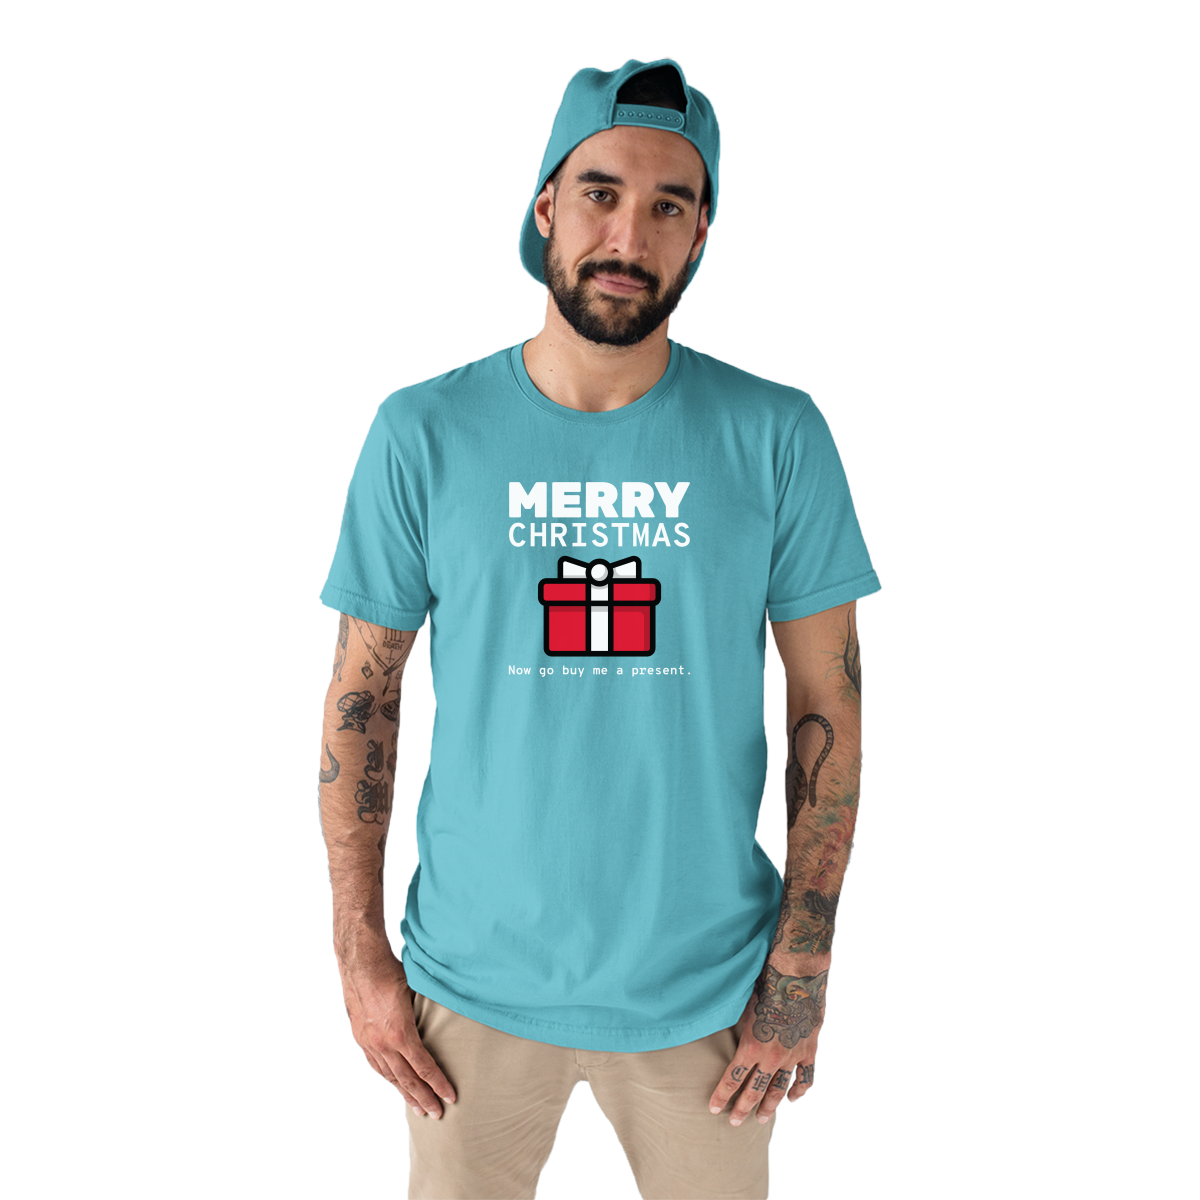 Merry Christmas Now Go Buy Me a Present Men's T-shirt | Turquoise